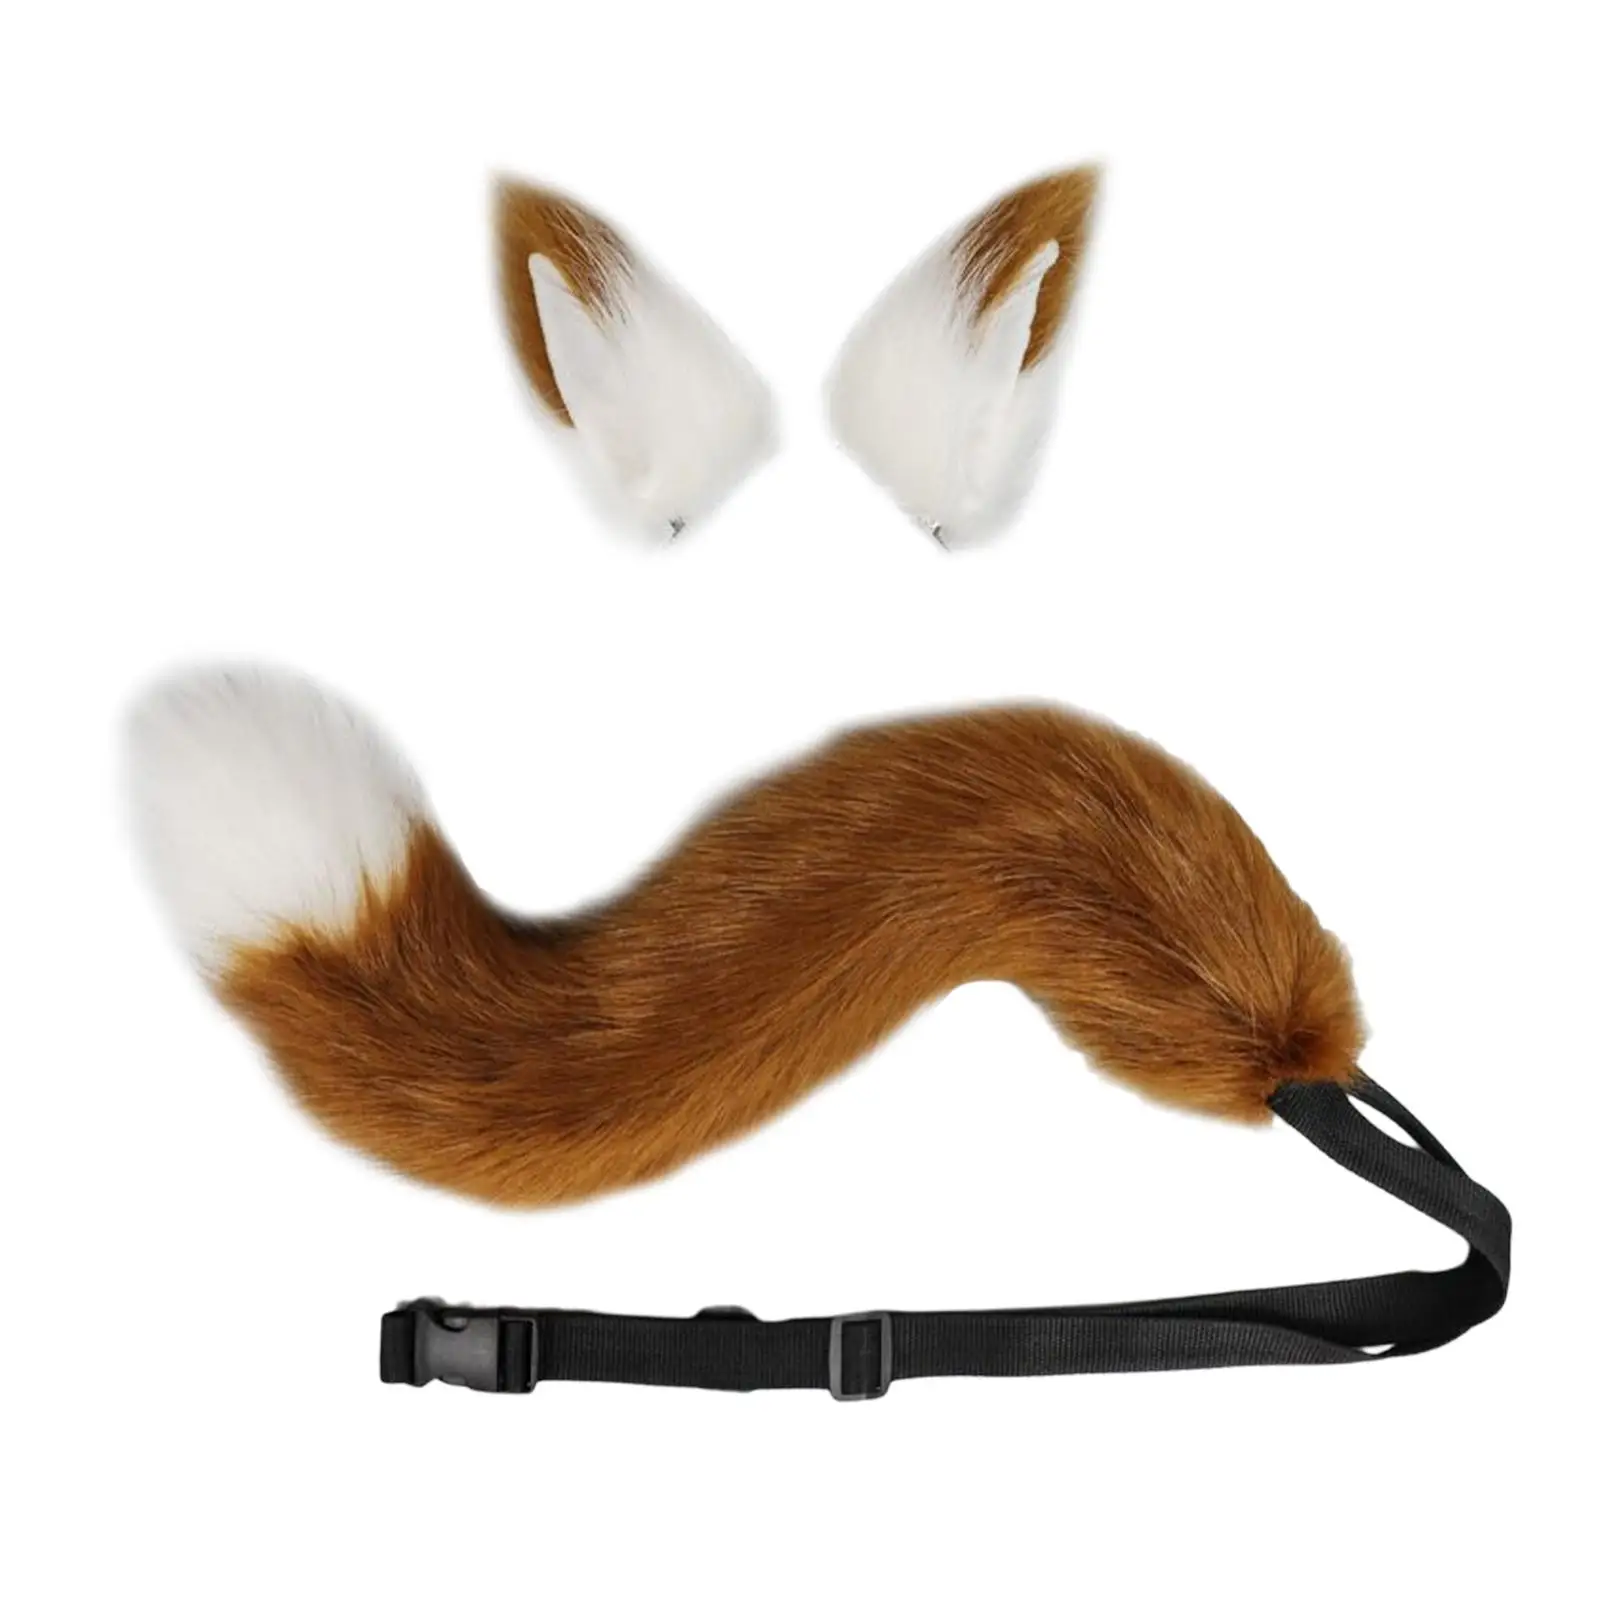  Wolf Ears Tail Cosplay Set Plush Animal Furry Gifts Hair Clip for Dress up Fancy Party Anime Adults Children.